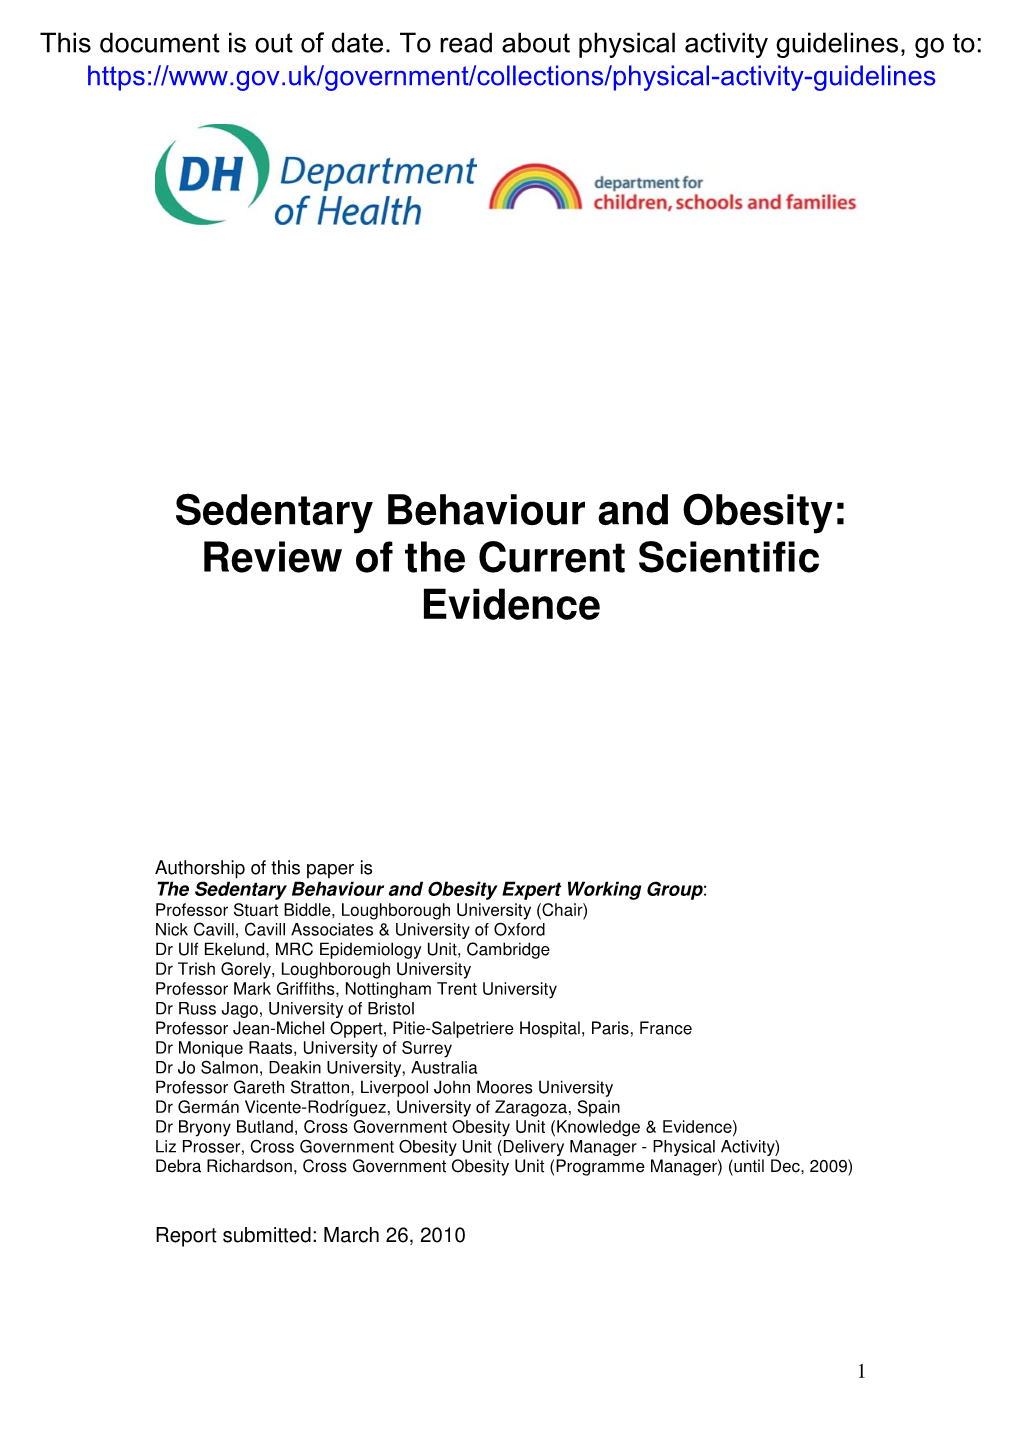 Sedentary Behaviour and Obesity: Review of the Current Scientific Evidence